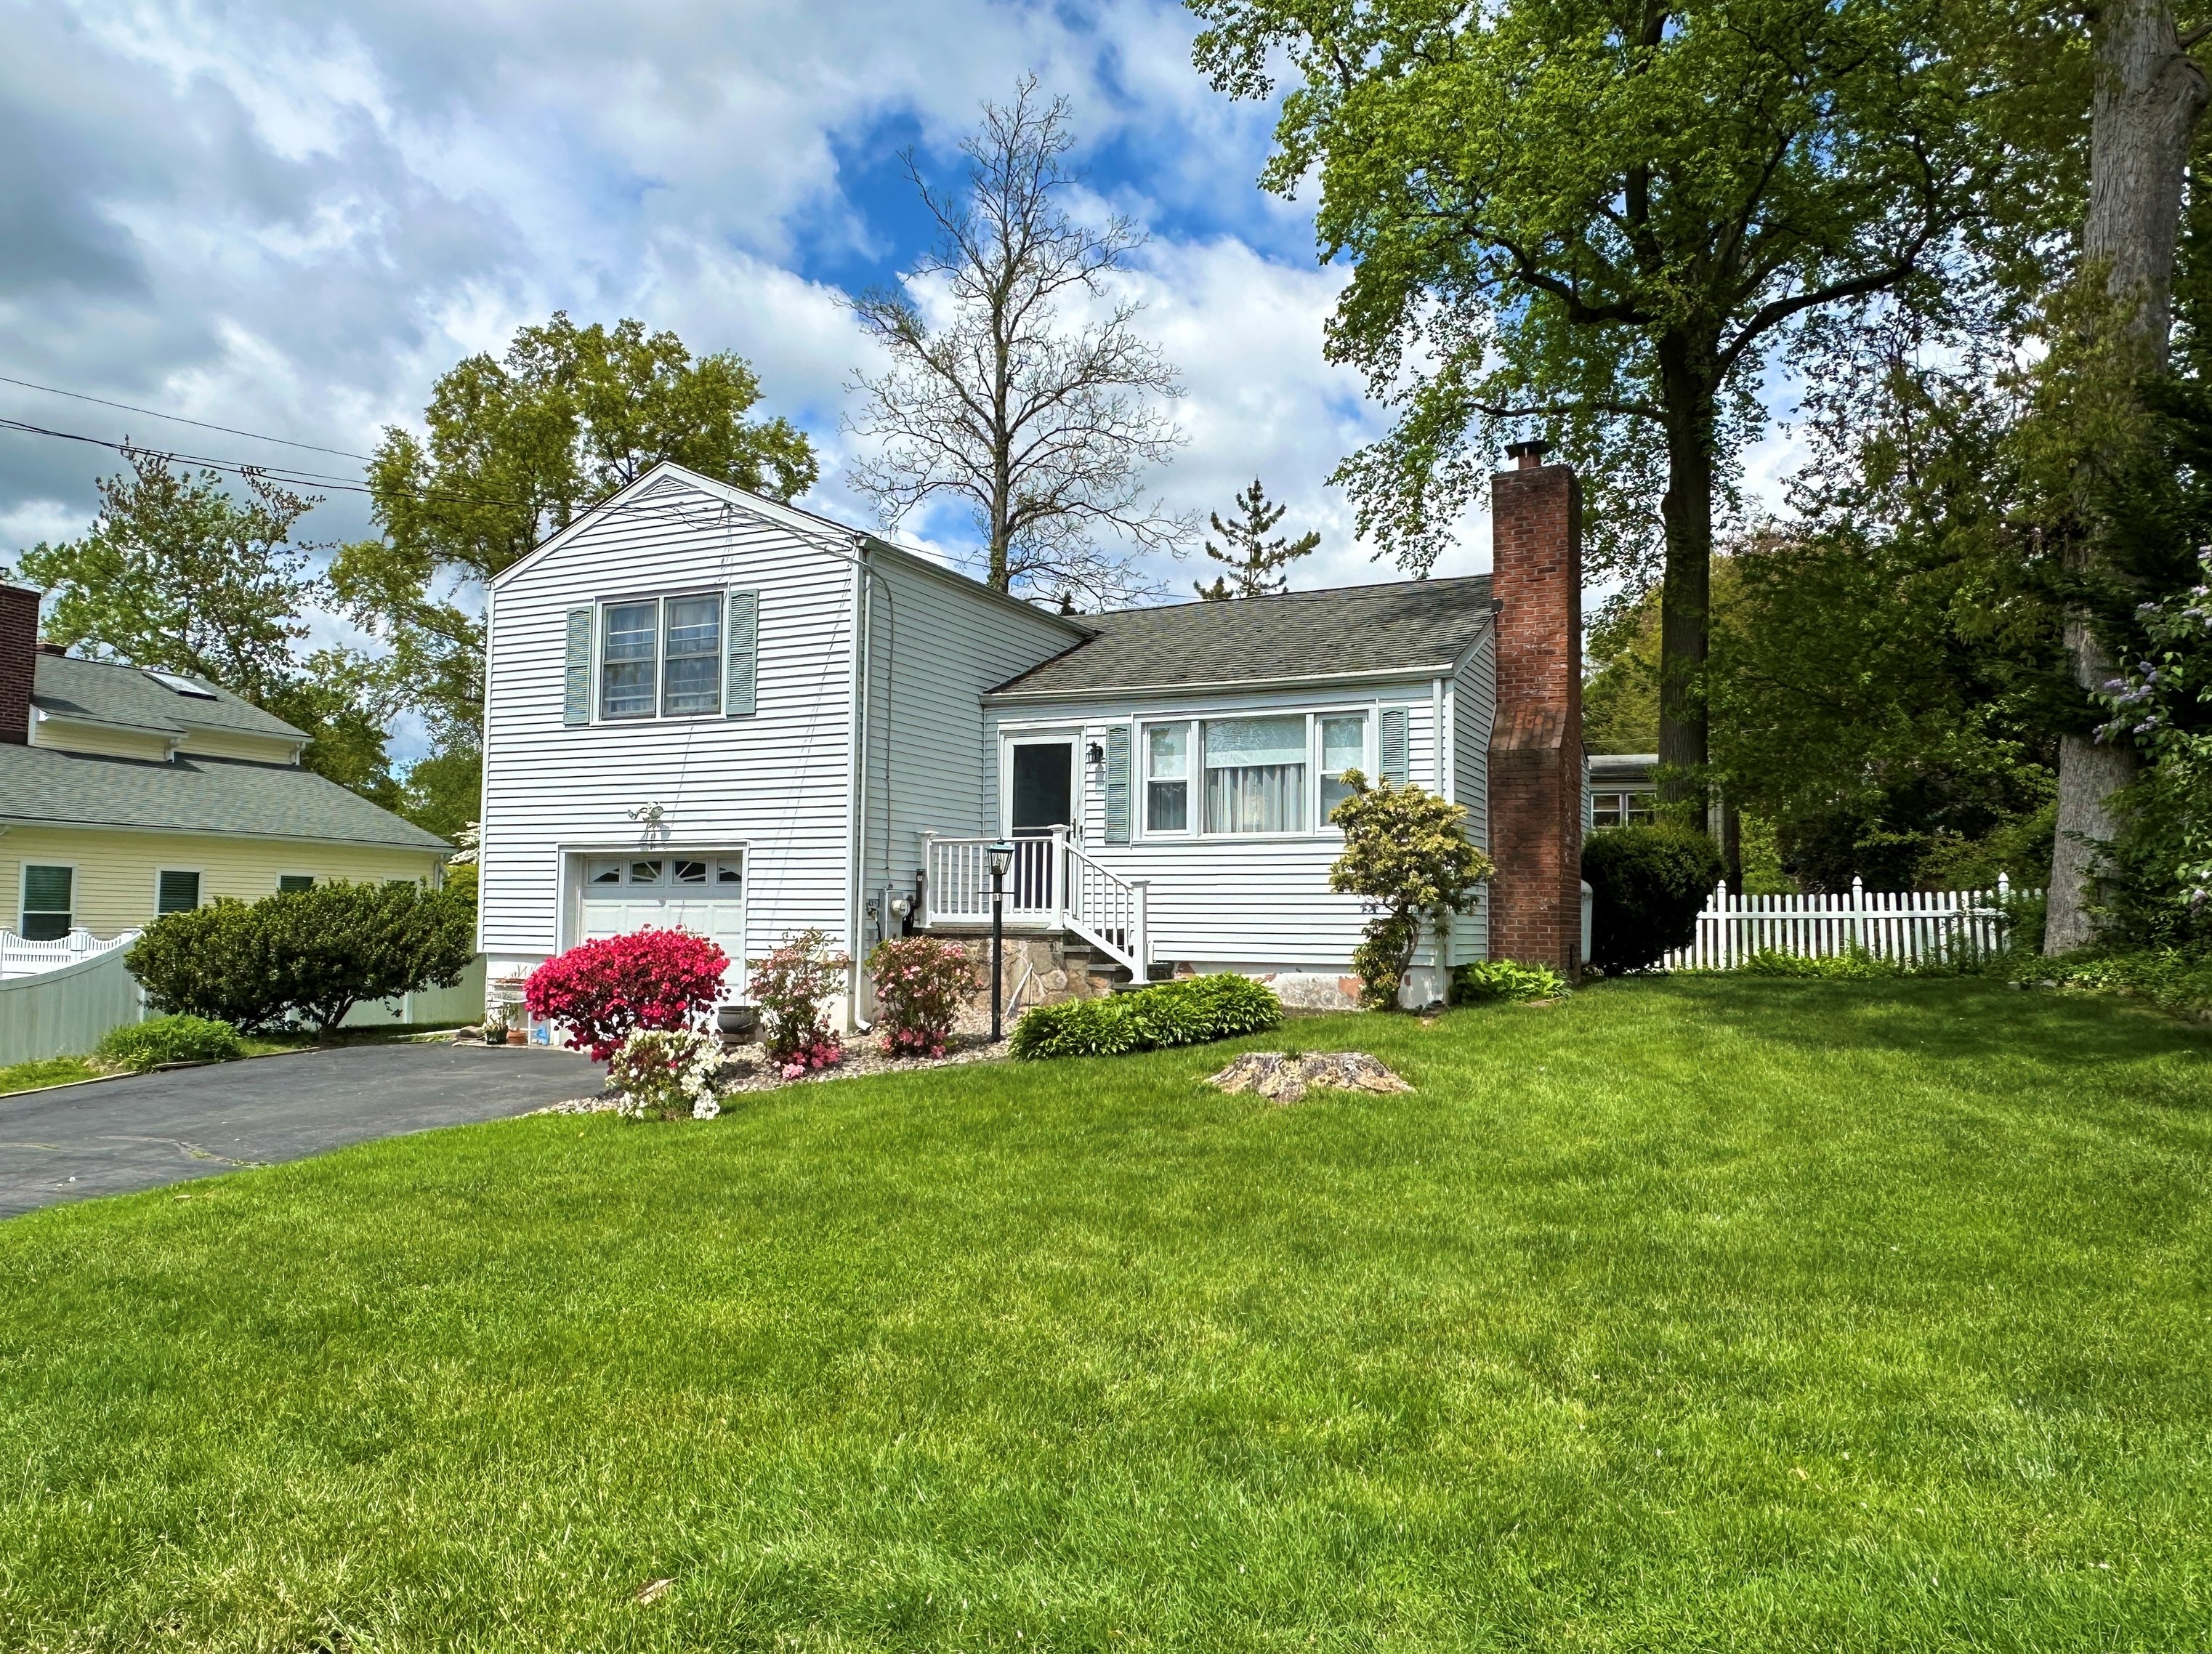 81 Indian River Rd, Milford, CT 06460